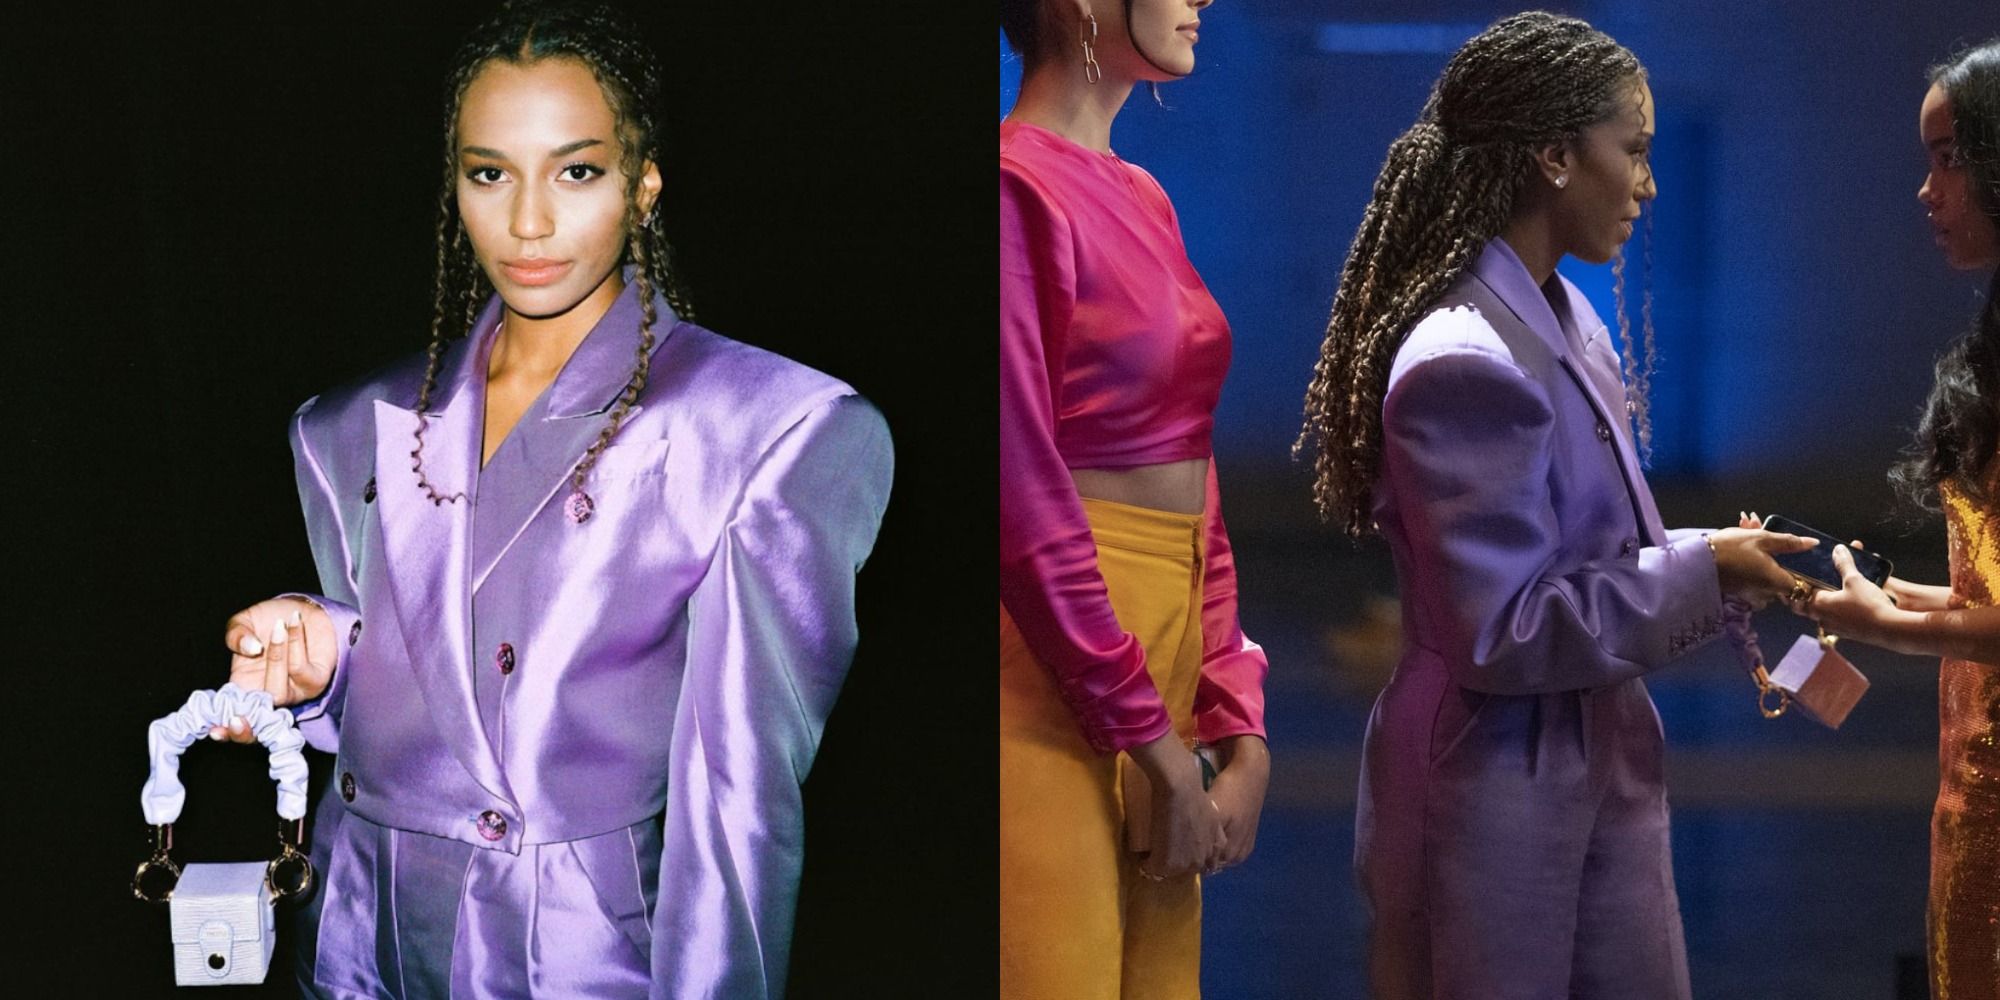 Split image of Monet posing in a purple suit, and Monet and Luna speaking to Zoya.